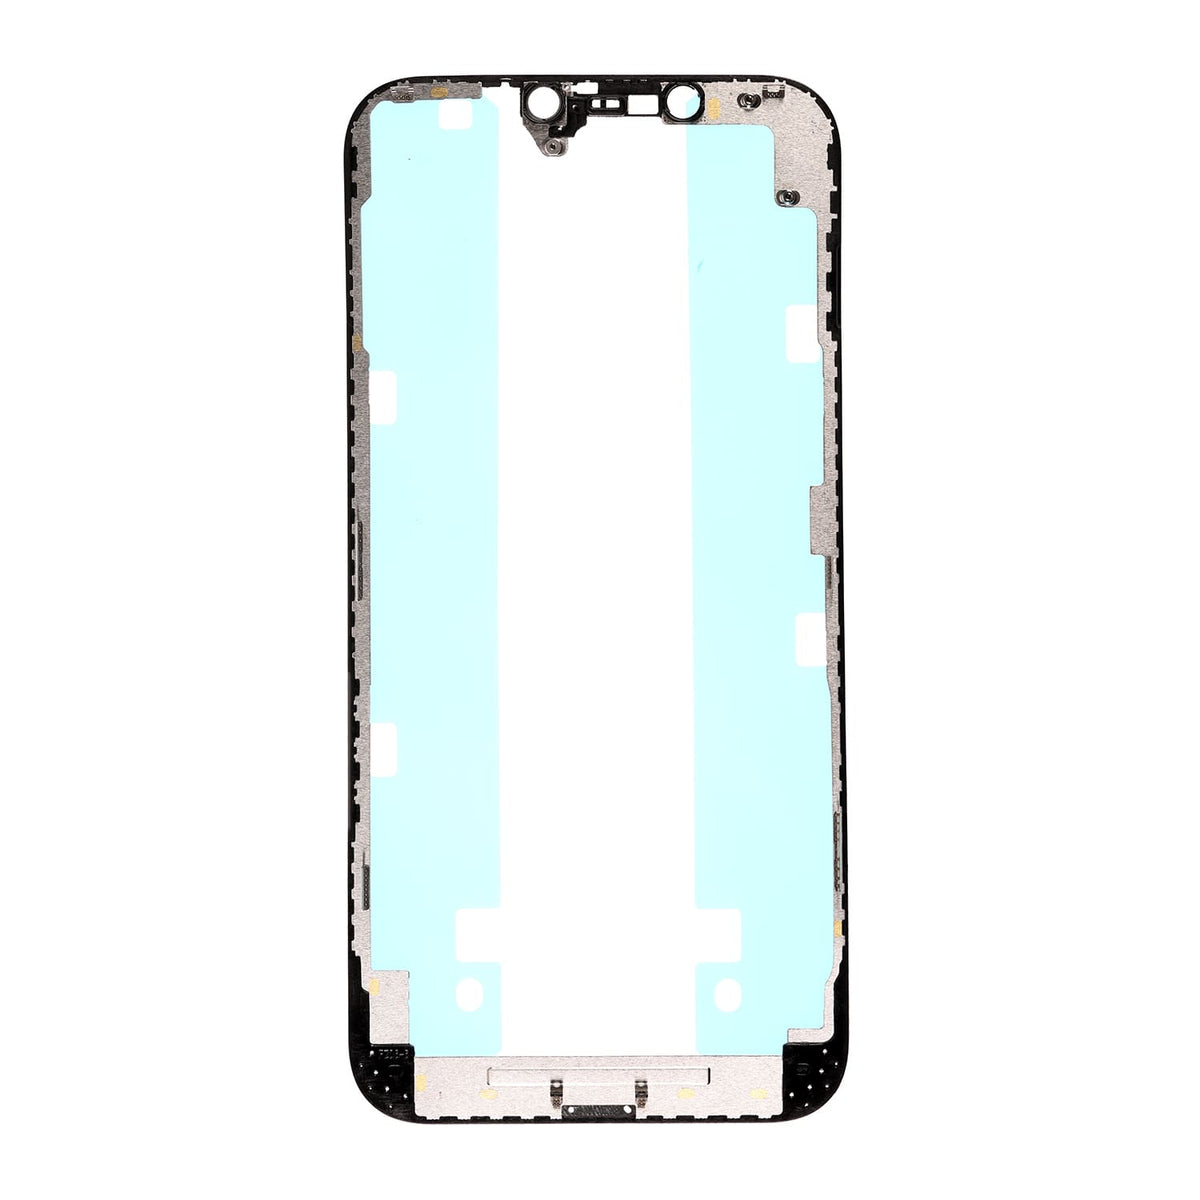 FRONT SUPPORTING DIGITIZER FRAME FOR IPHONE 12 PRO MAX / 12 PRO / 12